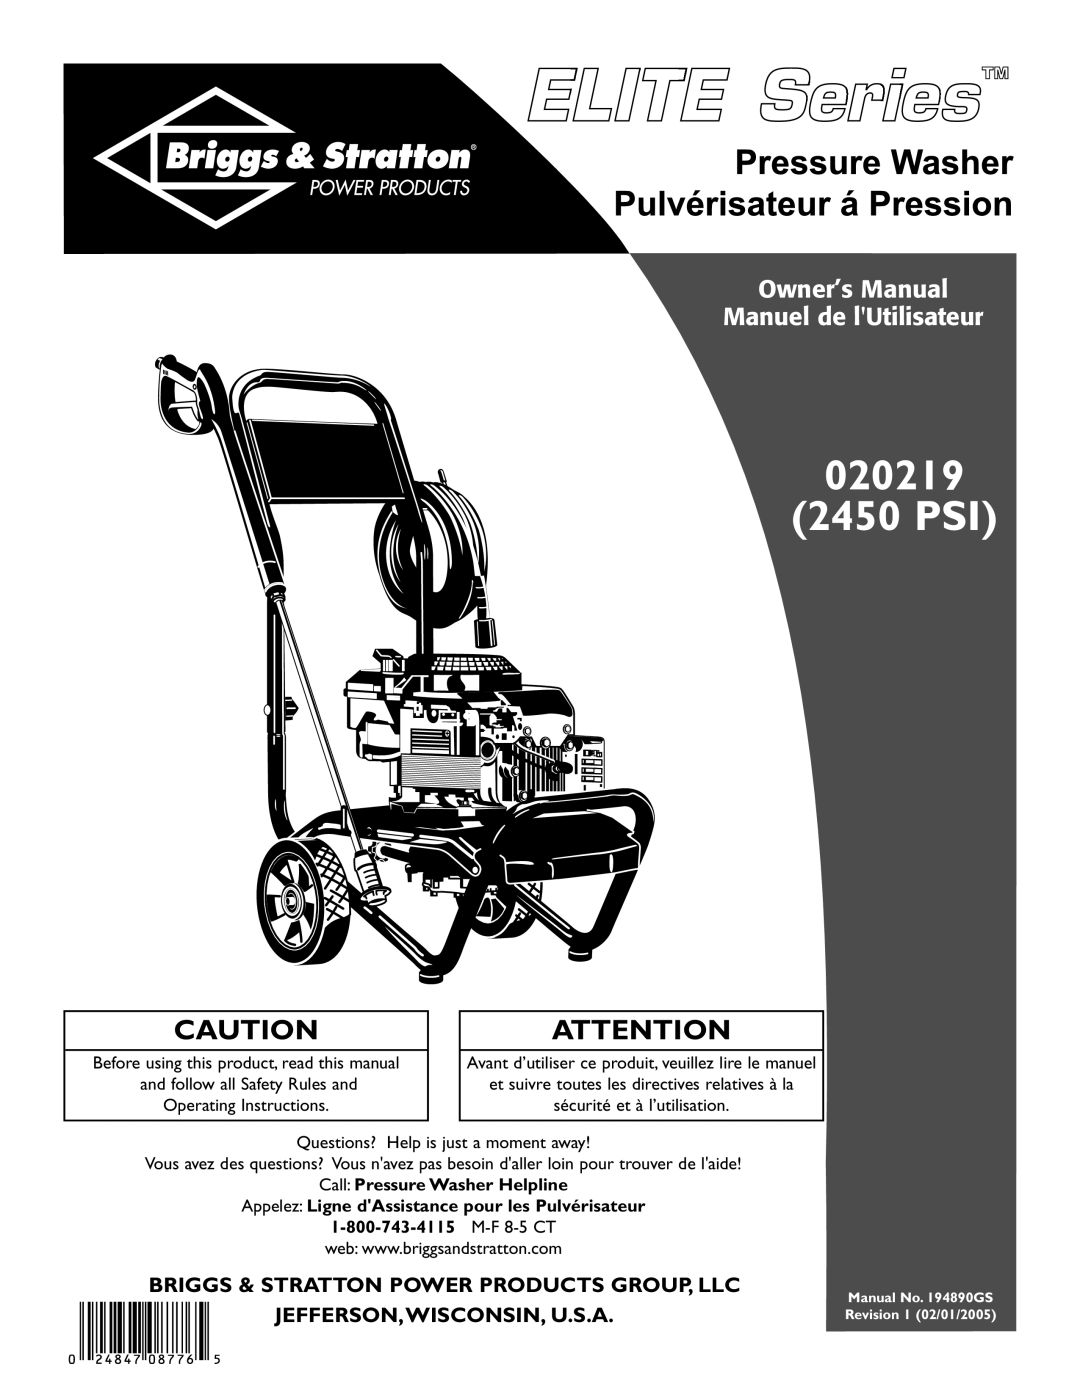 Briggs & Stratton 020219 owner manual Briggs & Stratton Power Products Group, Llc, Jefferson,Wisconsin, U.S.A 